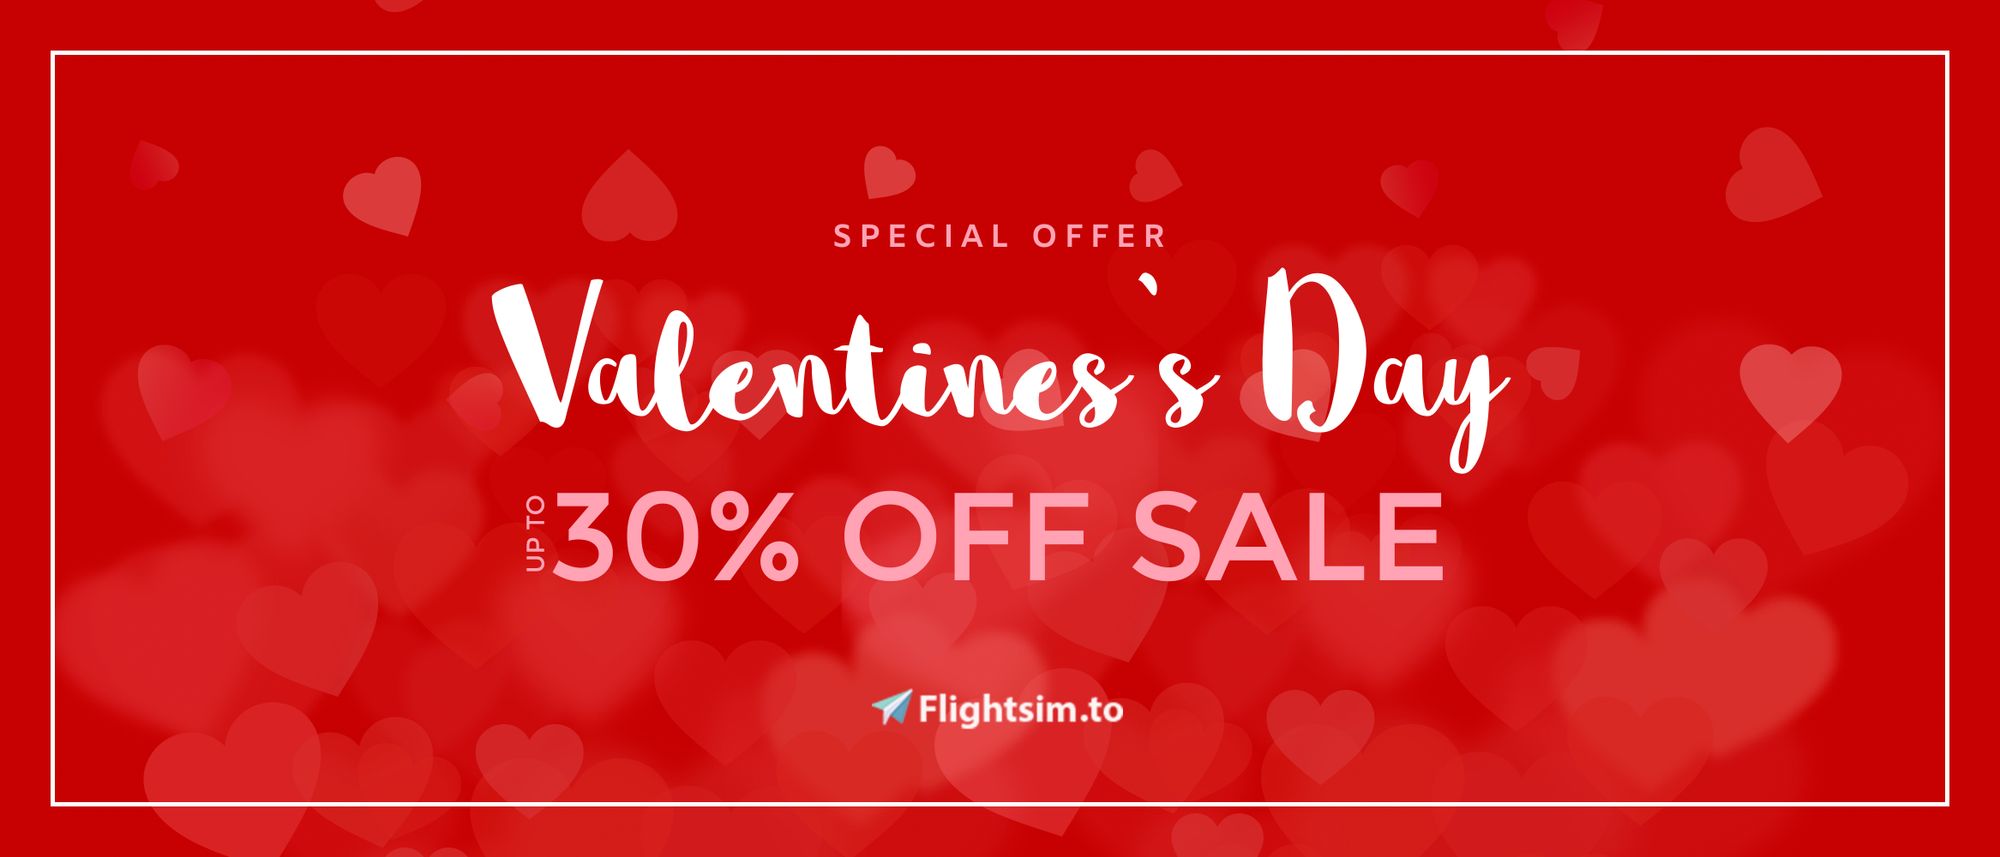 Valentine's Weekend Sale - Save up to 30%!